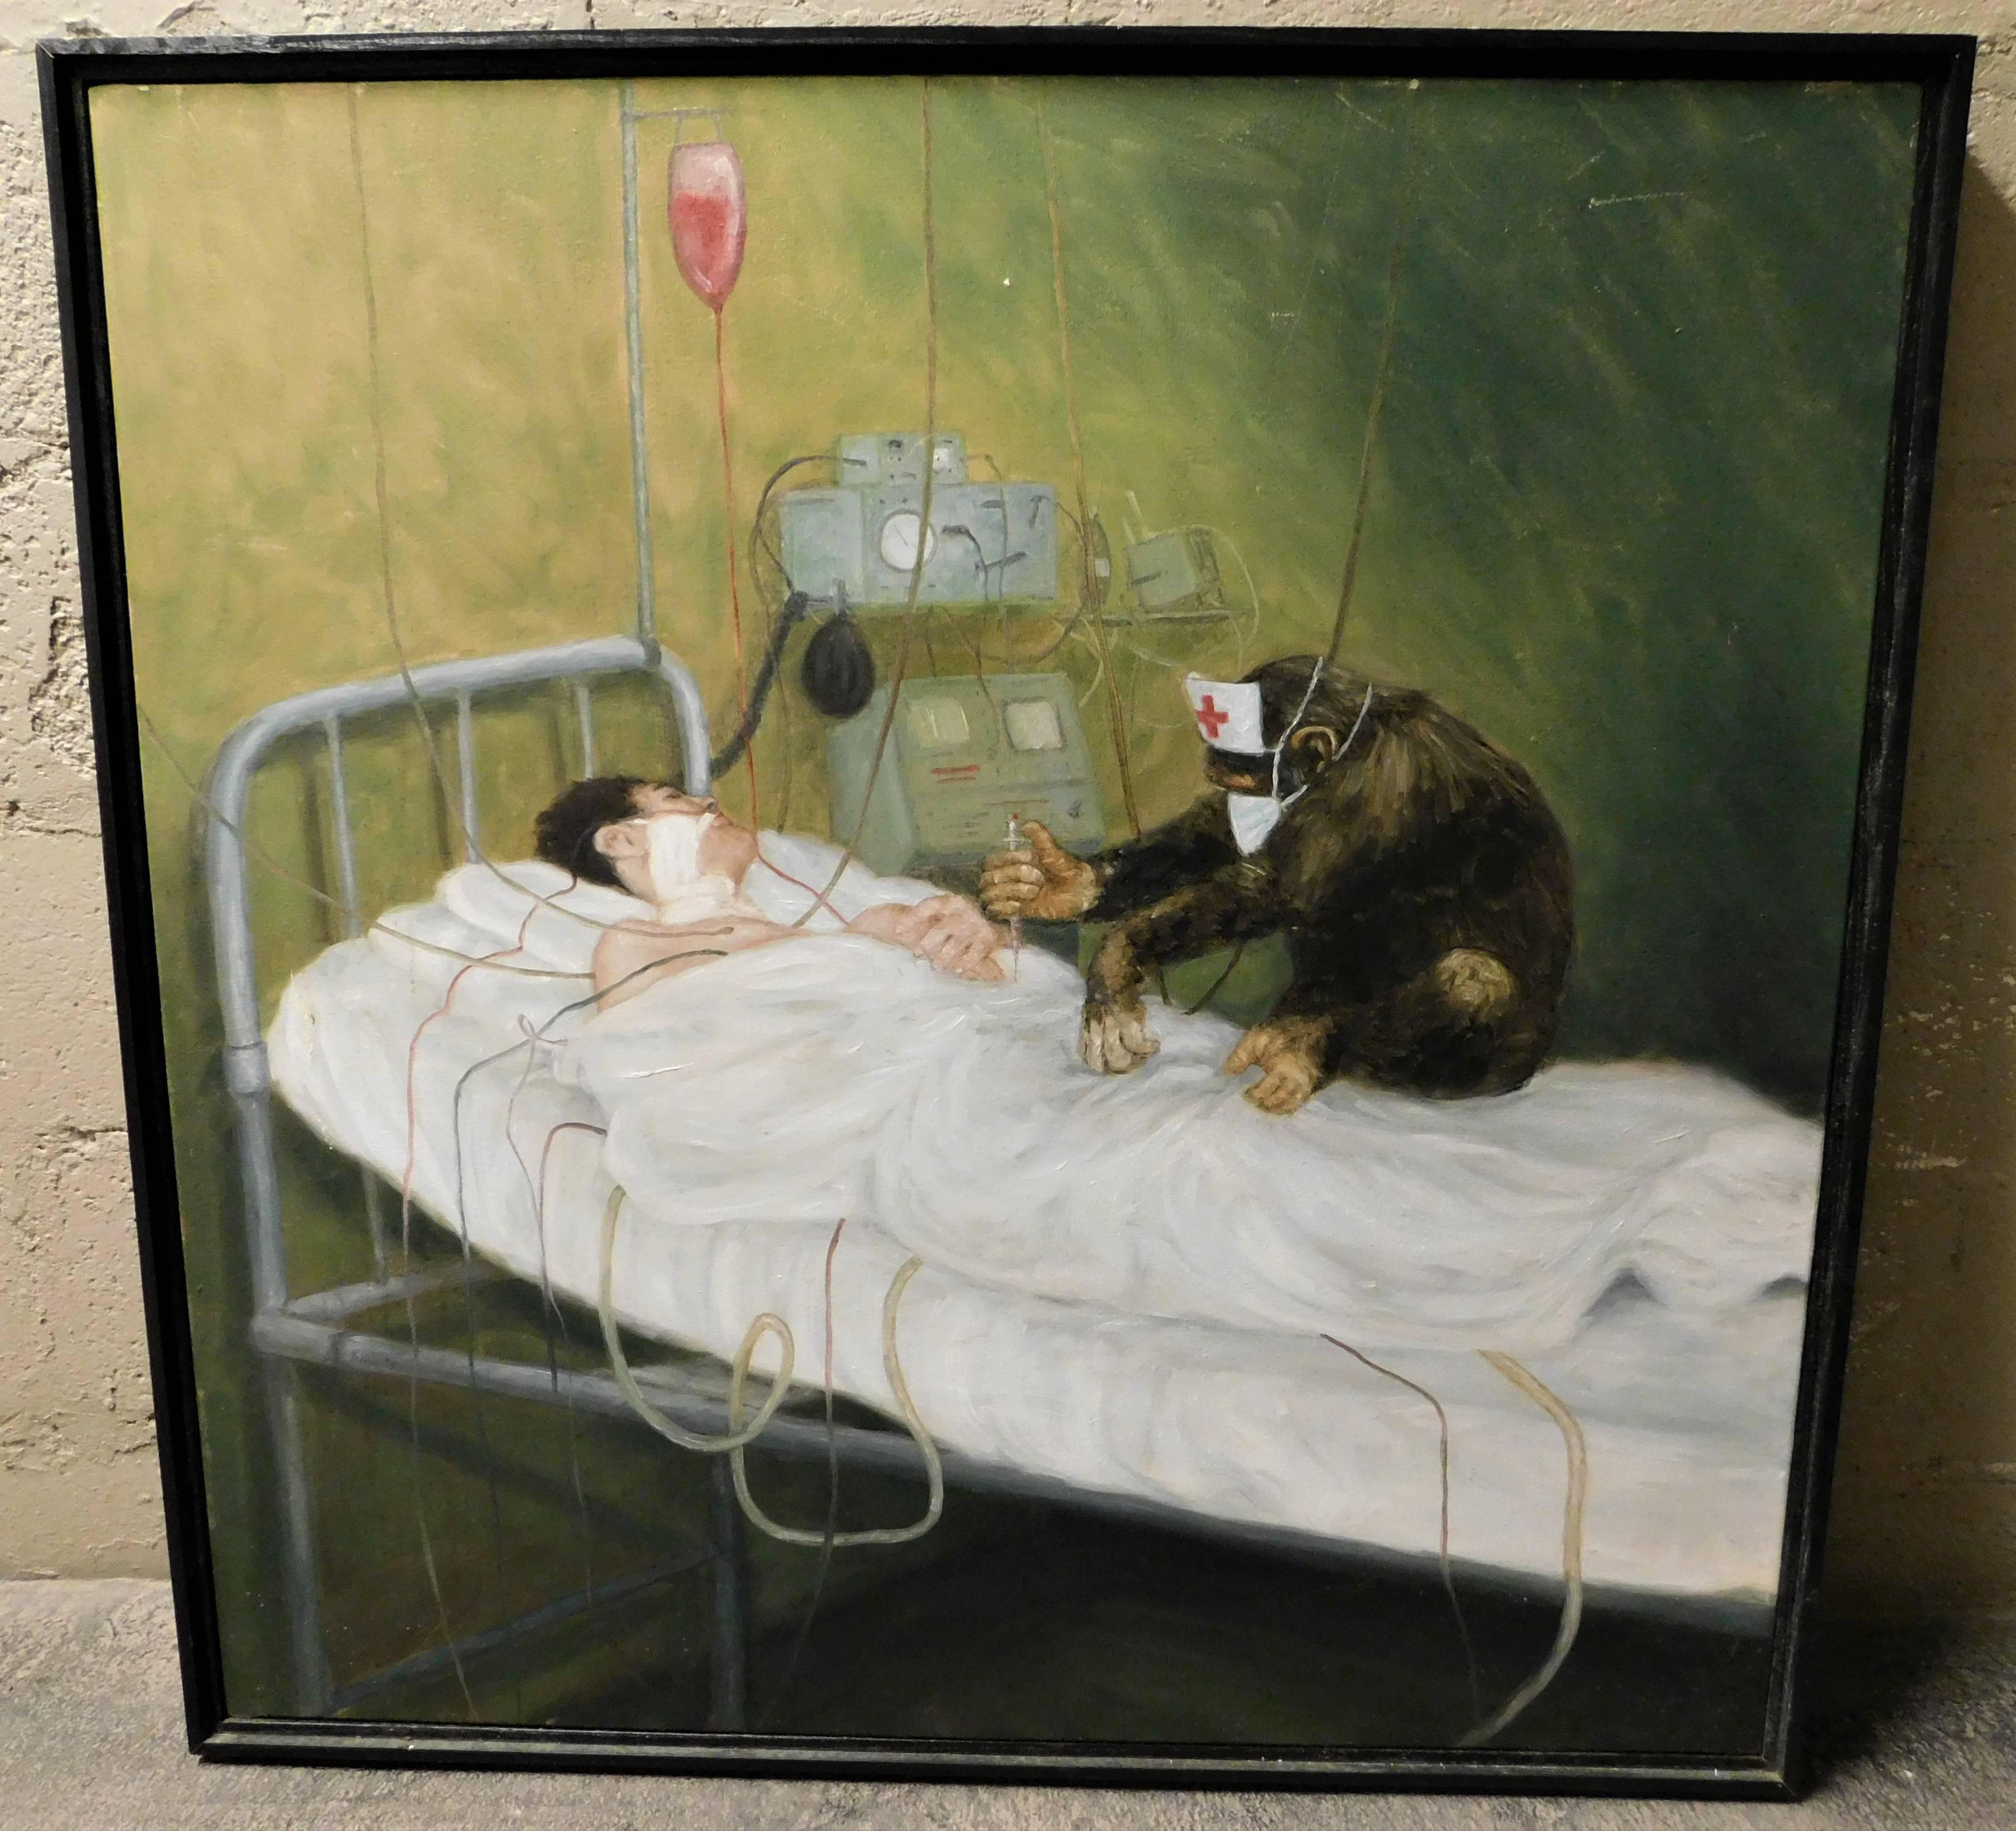 1950s original oil painting on canvas with a monkey nurse treating a patient in a hospital bed. The painting is by an unknown artist as it is not signed, it is from the 1950s and was possibly was an illustration for a science fiction magazine or a